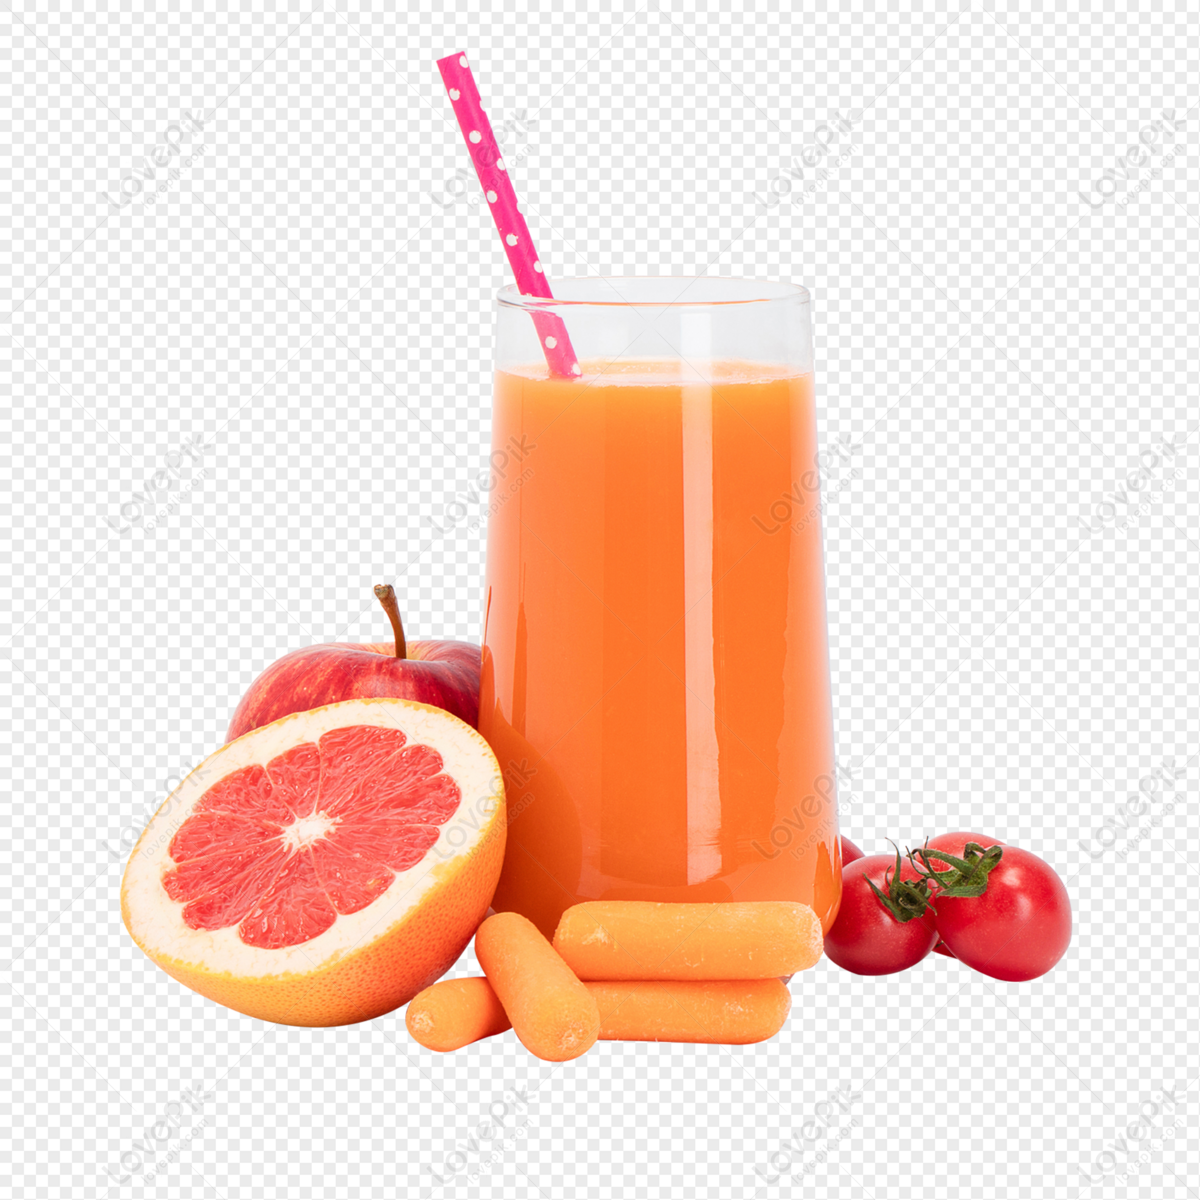 Fruit And Vegetable Mixed Juice Png Image And Psd File For Free Download Lovepik